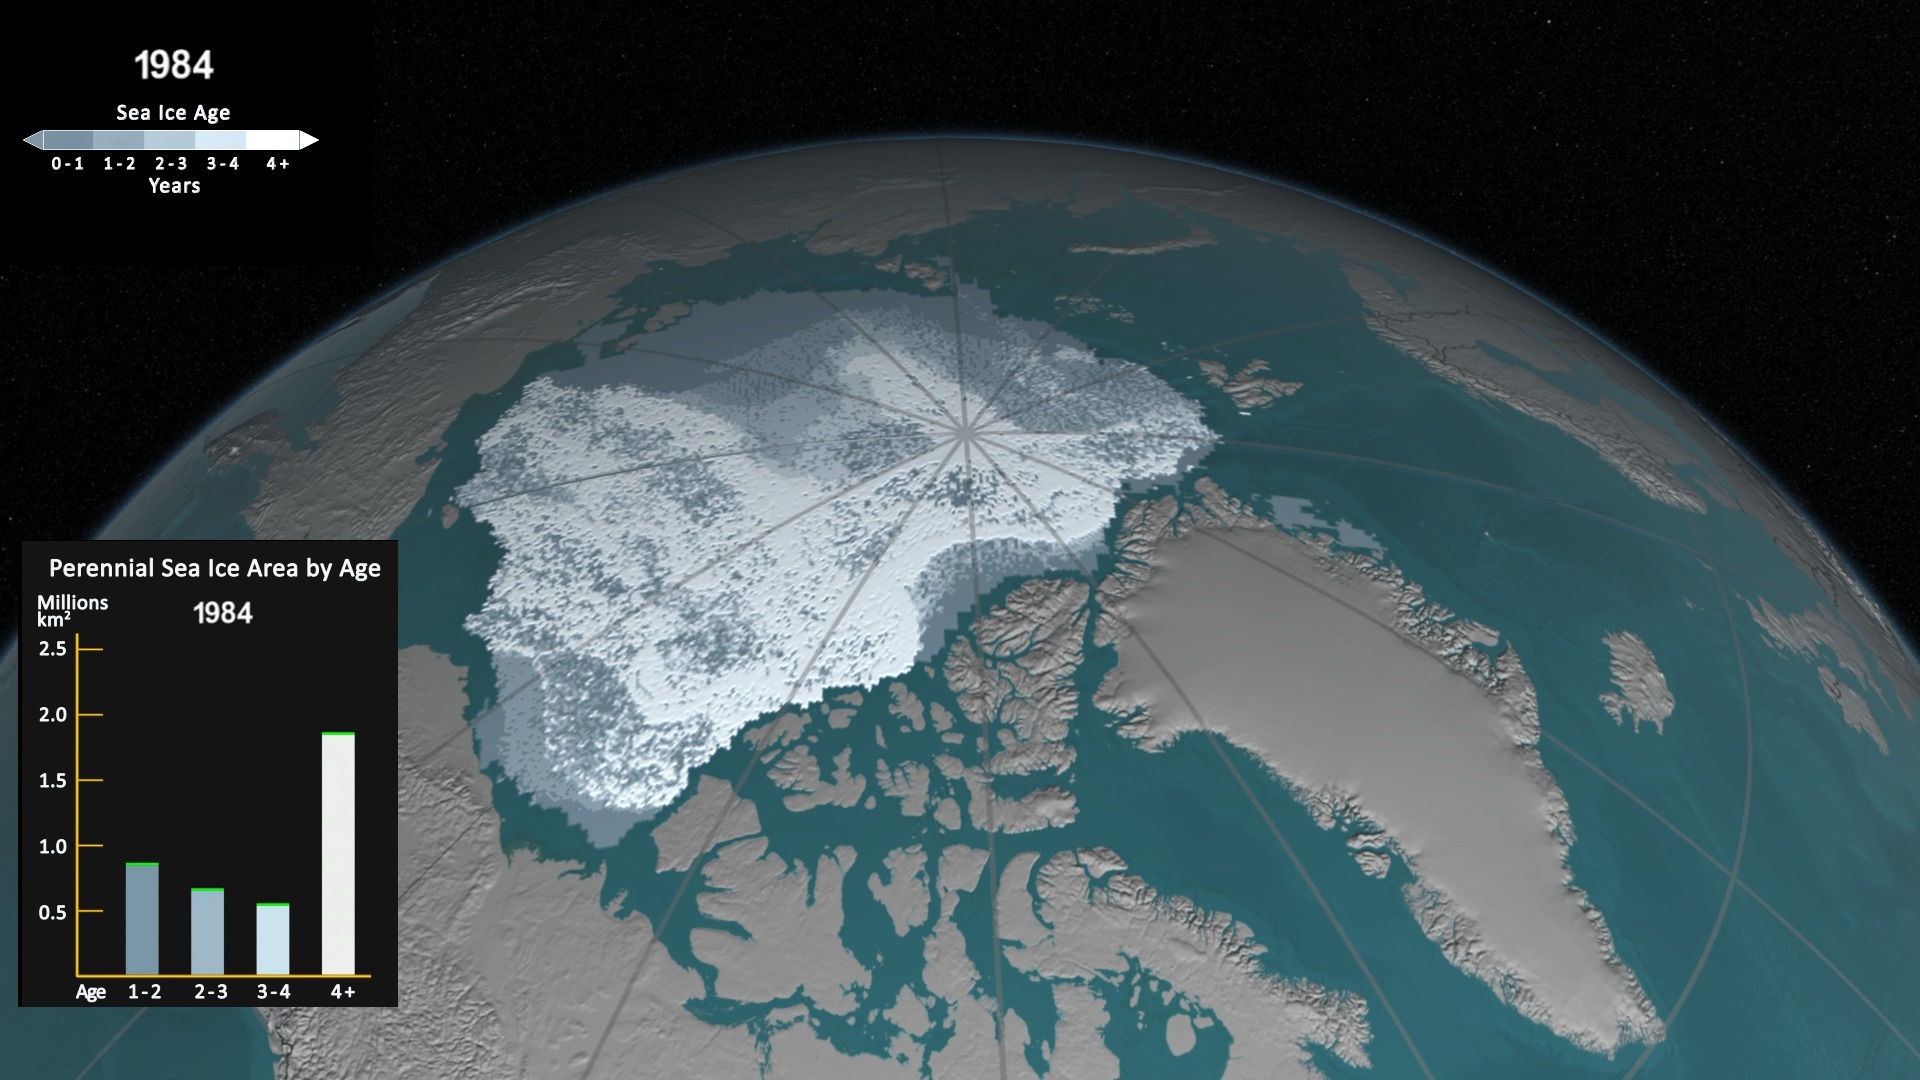 See this image for sea ice age in 1984.